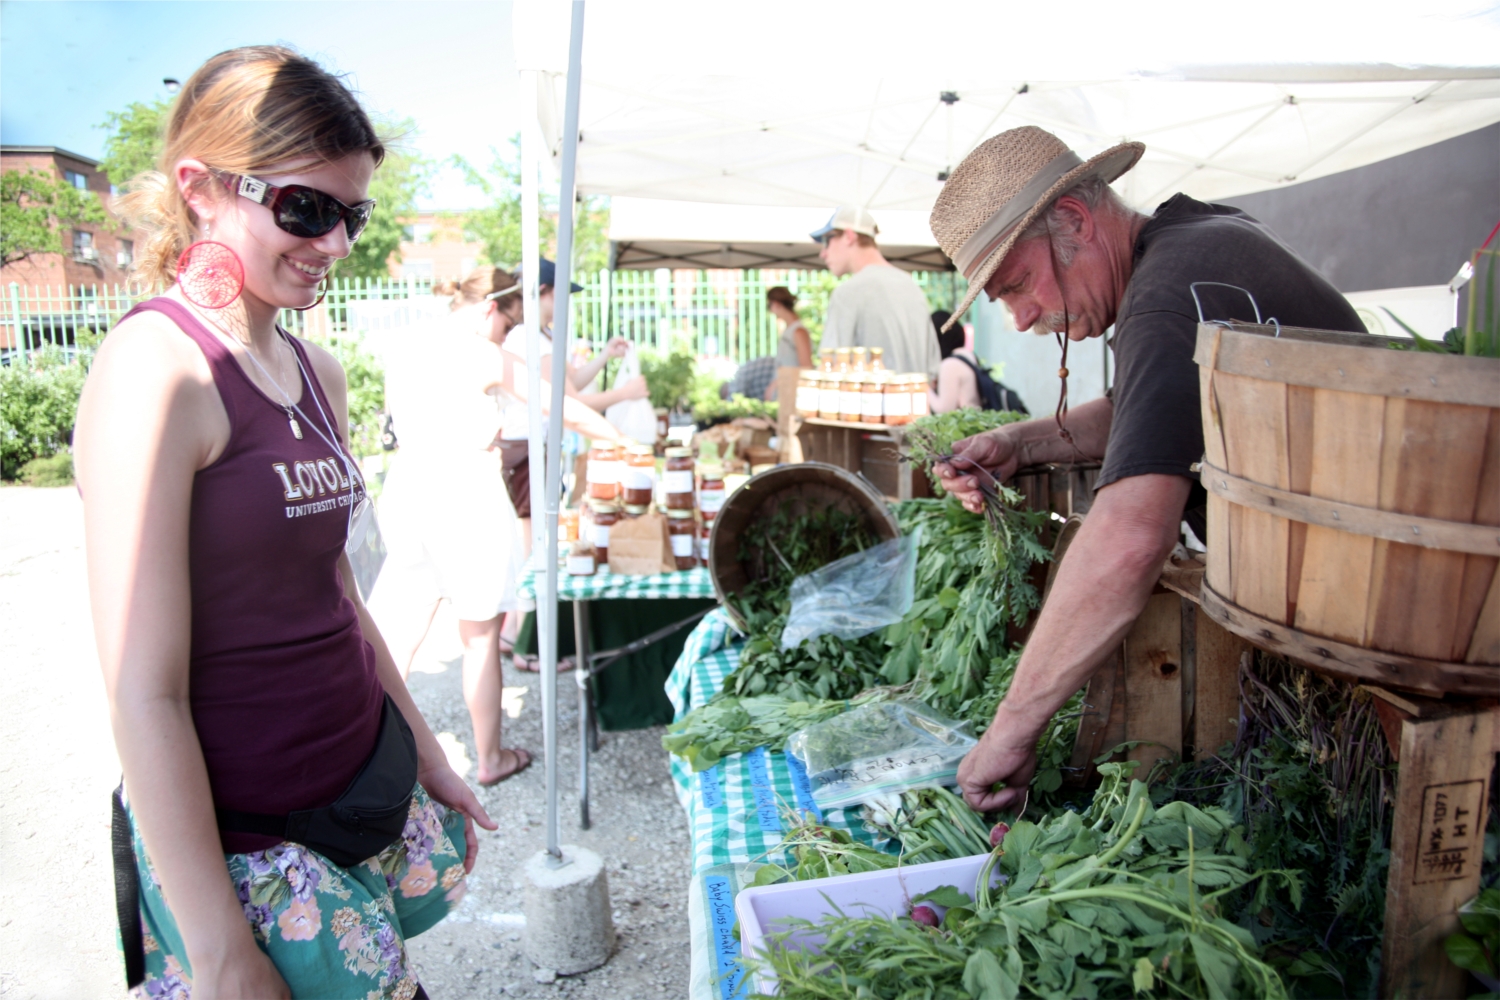 Loyola's on campus Farmers Market runs from mid-June to mid-October and offers employees and the surrounding community the opportunity to support local growers and producers.